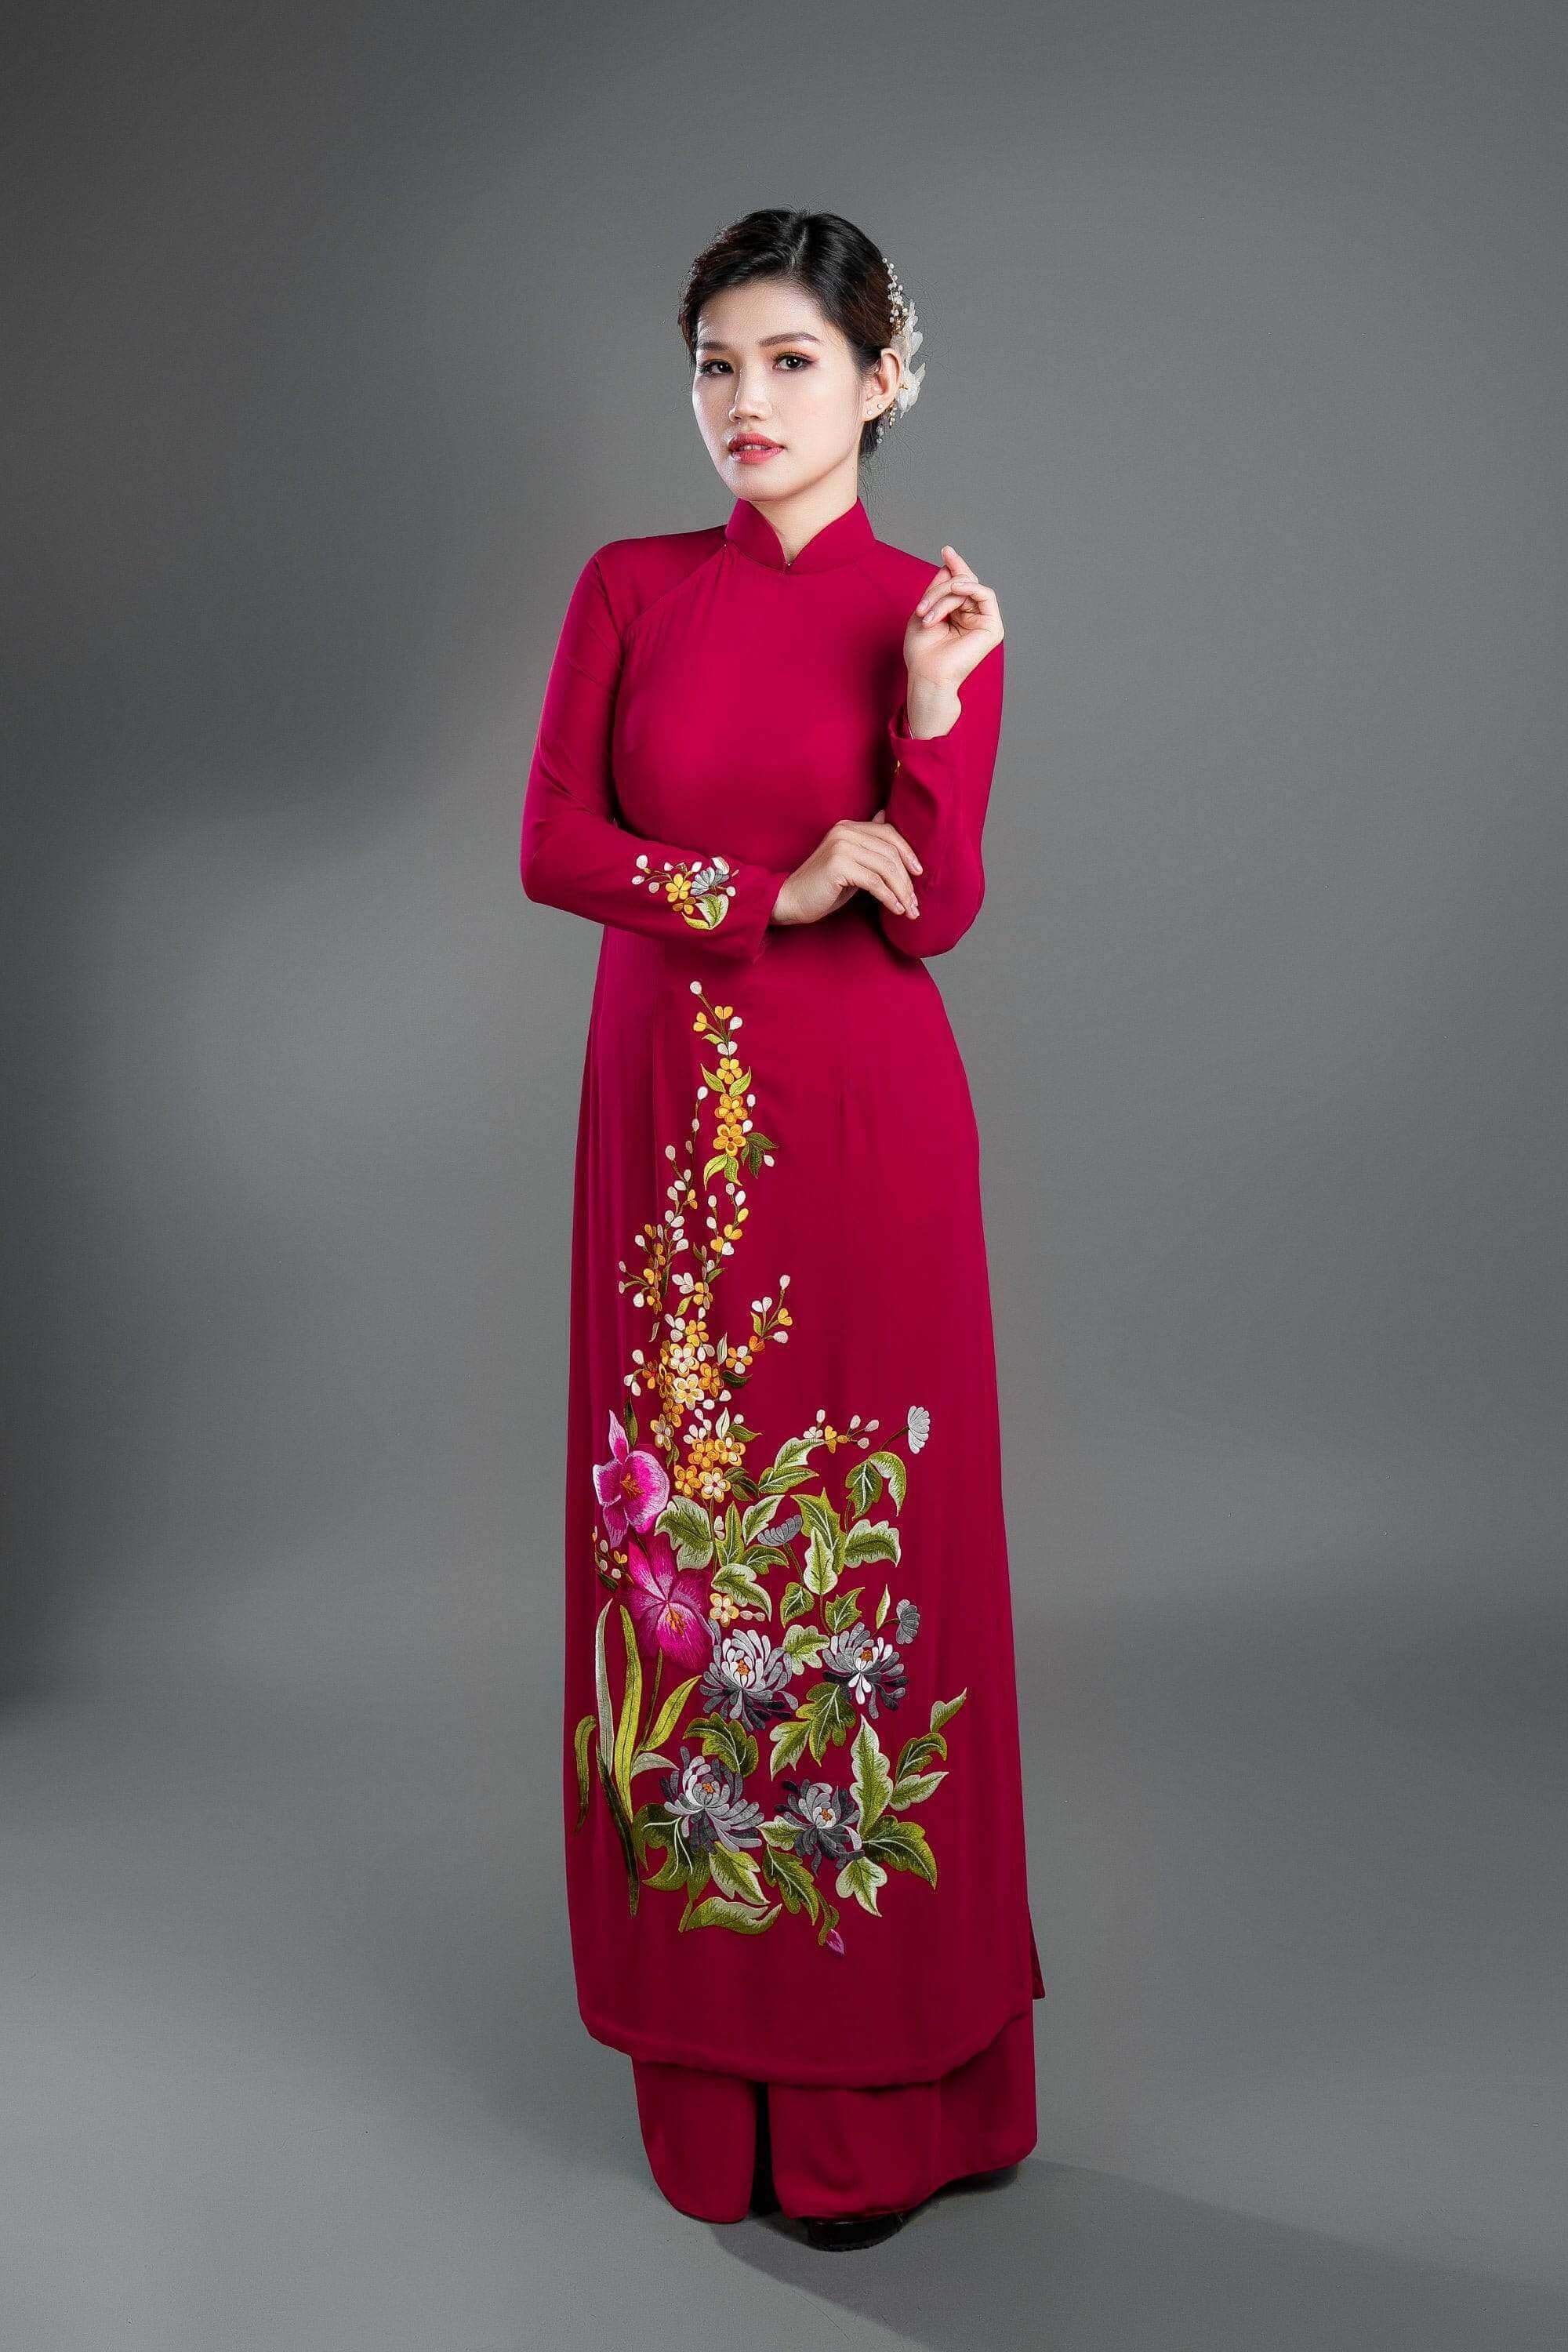 Custom made Vietnamese ao dai dress in yellow with embroidered, peacoc -  Mark&Vy Ao Dai